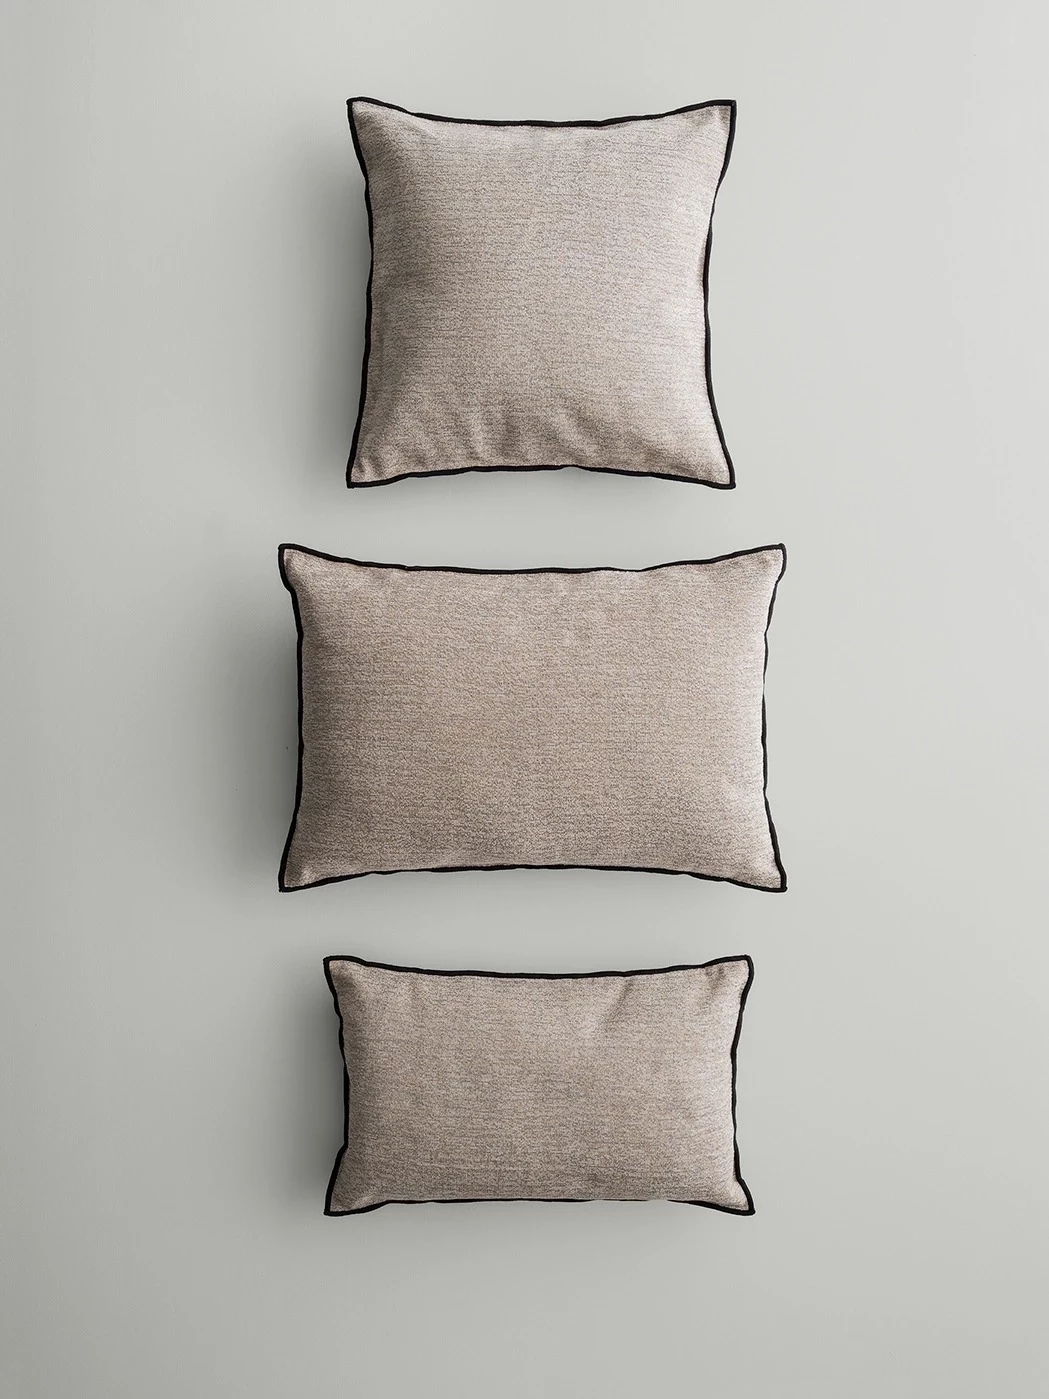 3 different pillows on floor